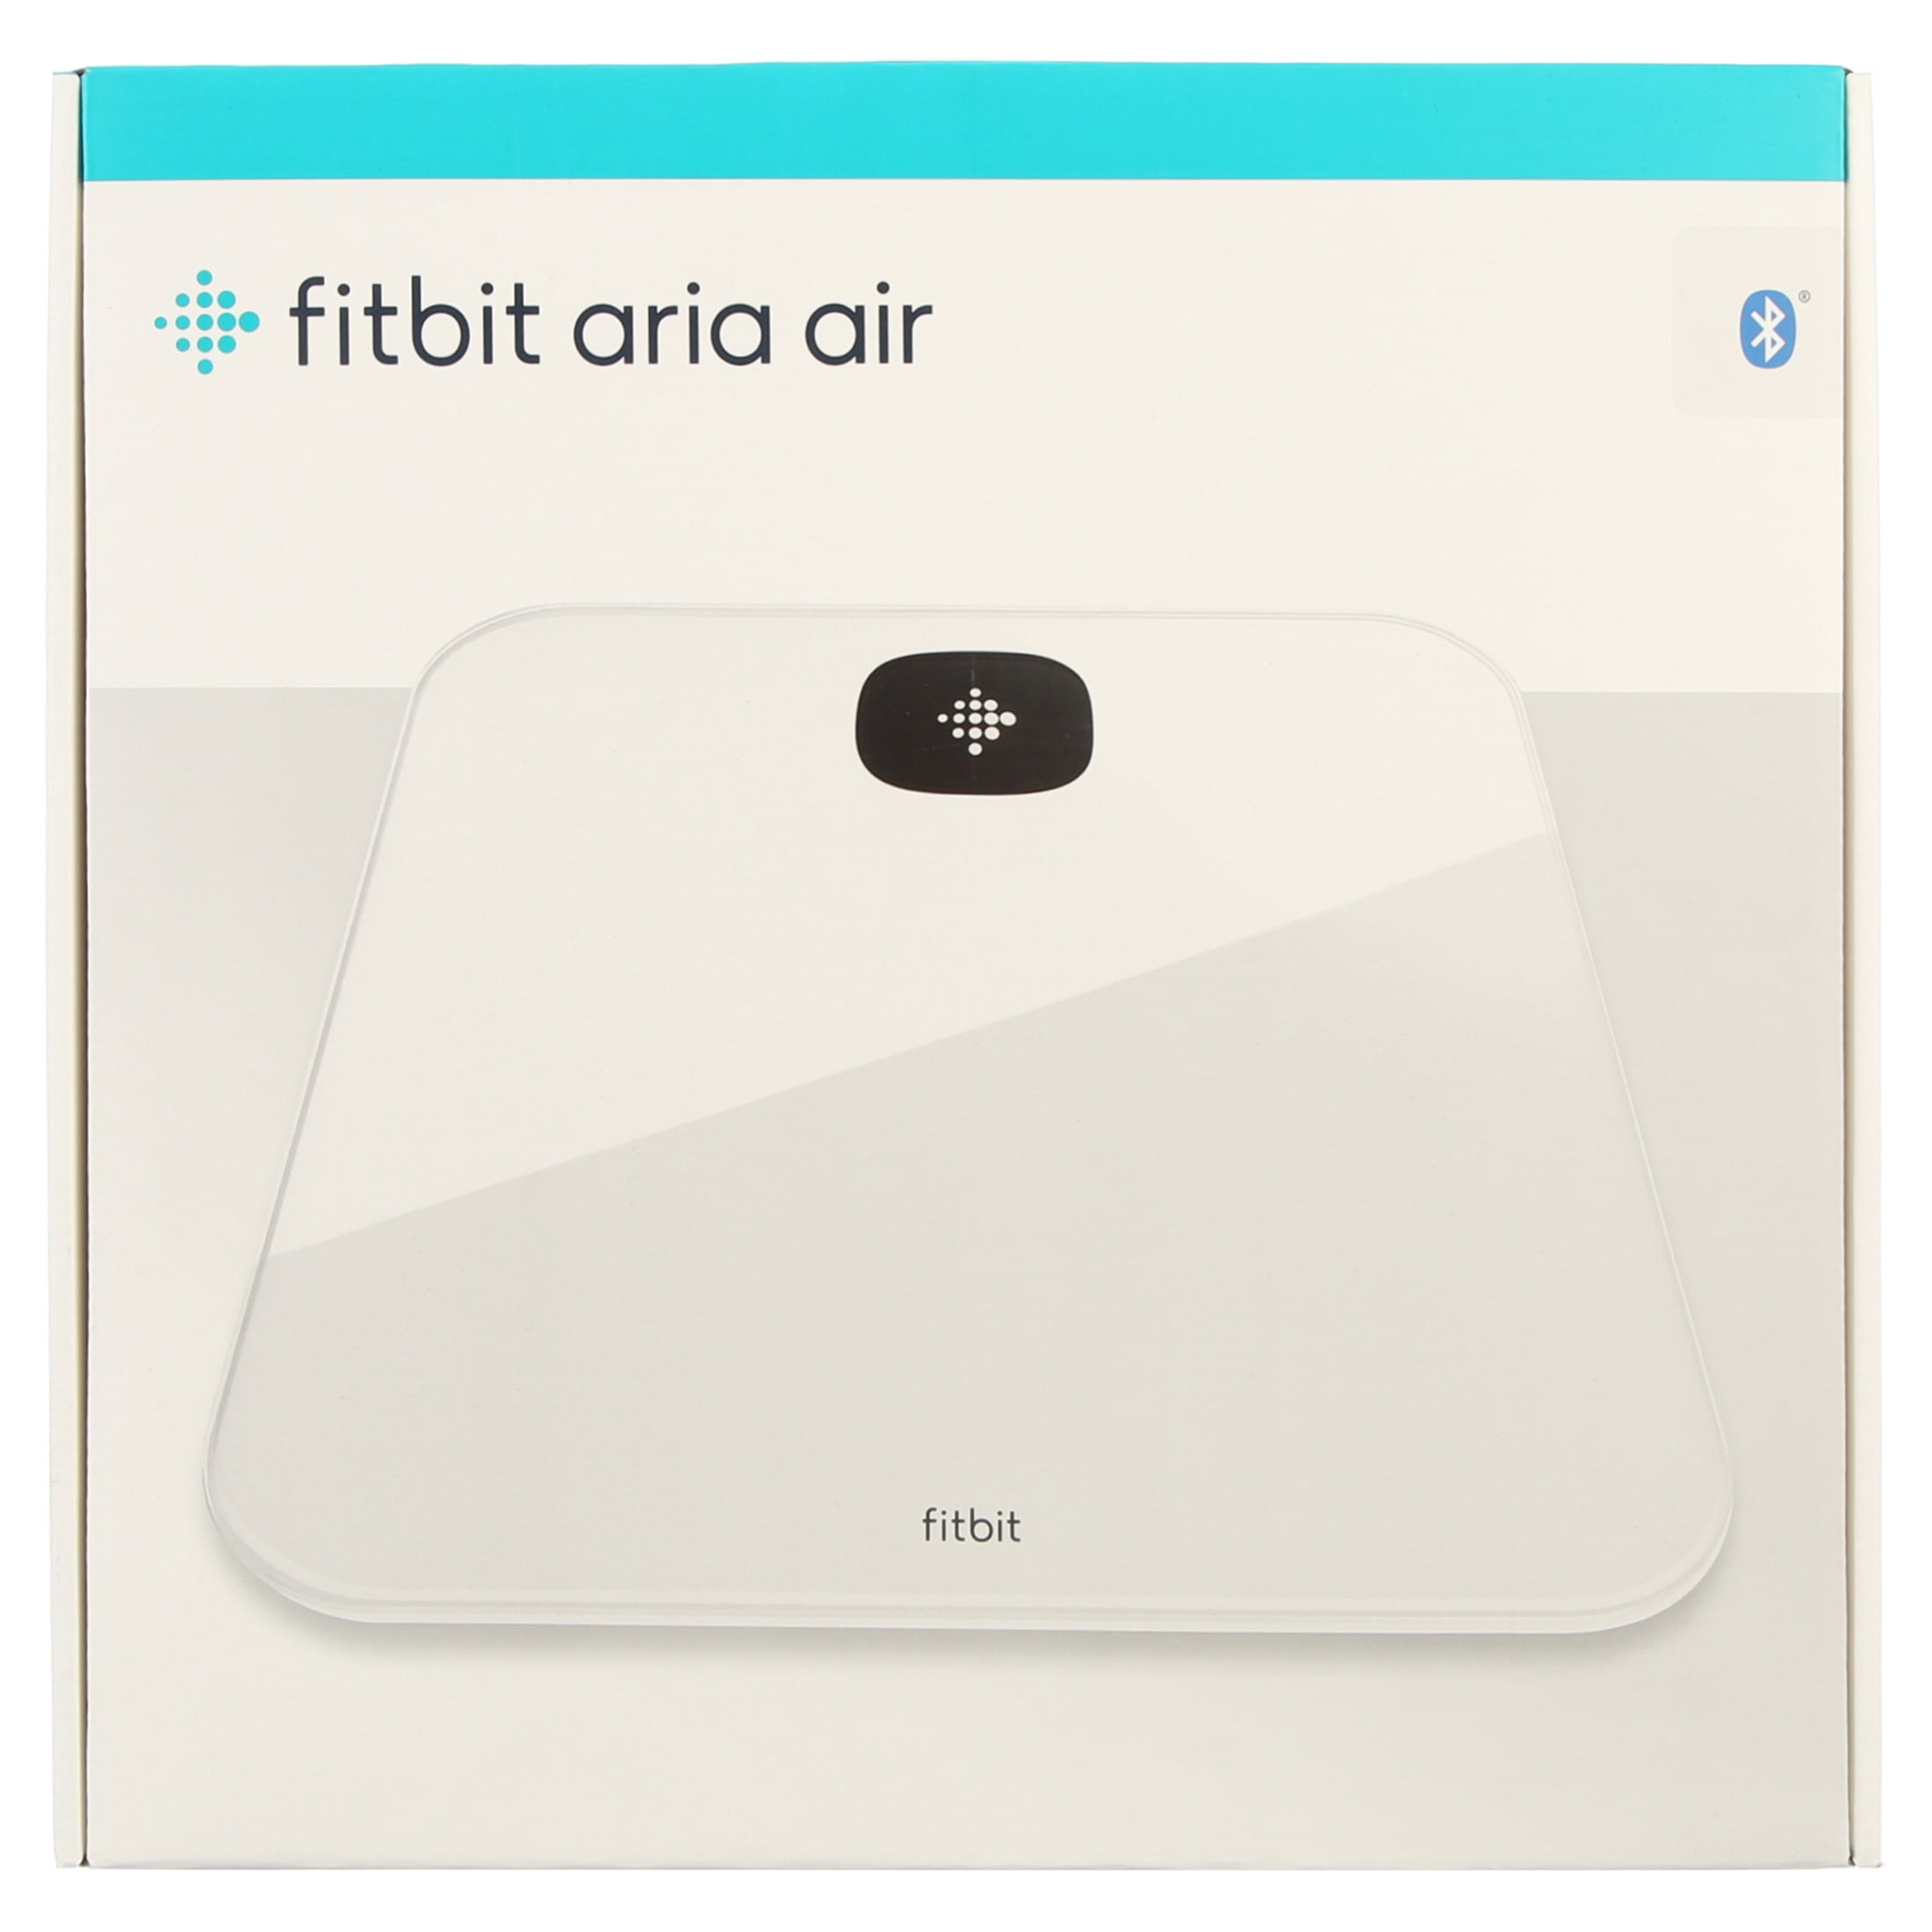 Fitbit Aria Air-smart scale, more complete health perspective